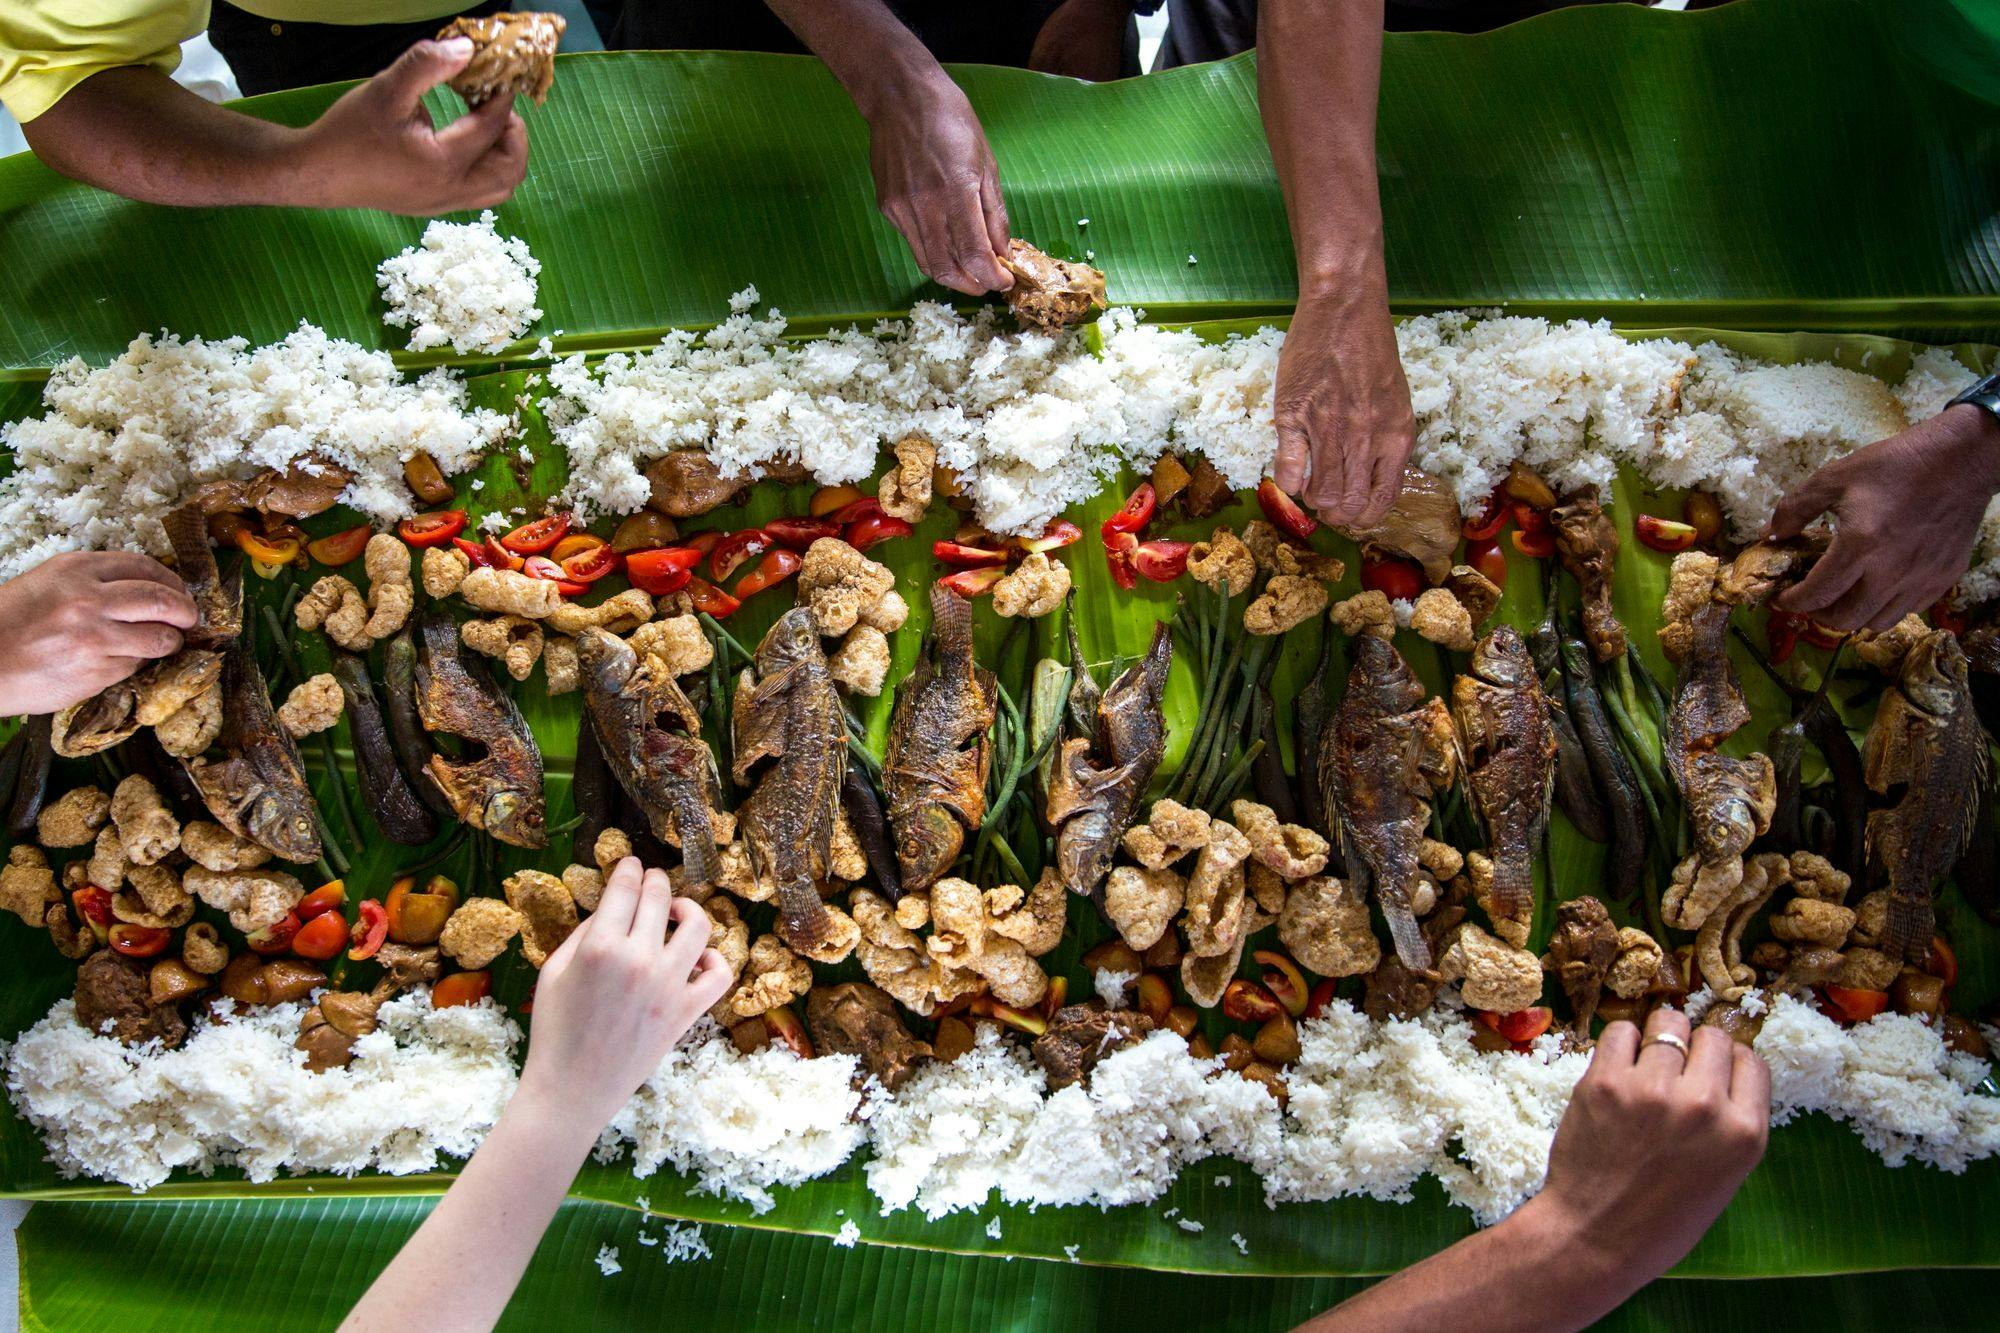 Discovering Gastronomic Gems: How to Find the Best Places to Eat in the Philippines